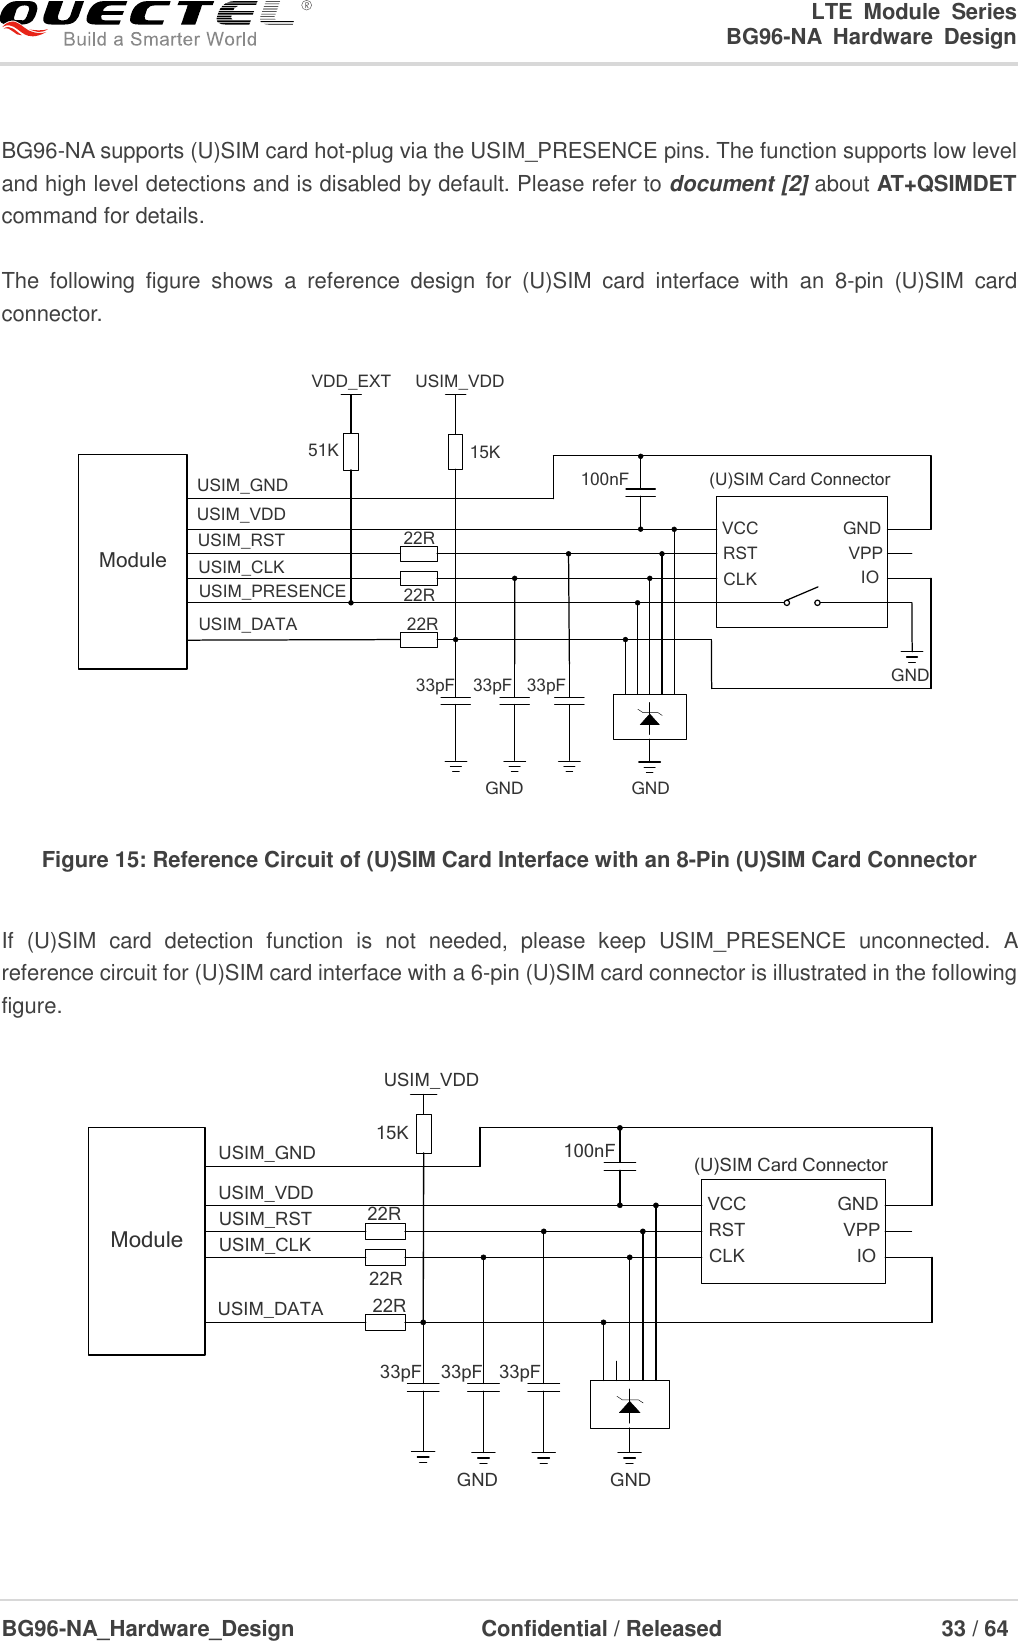 LTE  Module  Series                                                  BG96-NA  Hardware  Design  BG96-NA_Hardware_Design                              Confidential / Released                                  33 / 64     BG96-NA supports (U)SIM card hot-plug via the USIM_PRESENCE pins. The function supports low level and high level detections and is disabled by default. Please refer to document [2] about AT+QSIMDET command for details.  The  following  figure  shows  a  reference  design  for  (U)SIM  card  interface  with  an  8-pin  (U)SIM  card connector. ModuleUSIM_VDDUSIM_GNDUSIM_RSTUSIM_CLKUSIM_DATAUSIM_PRESENCE22R22R22RVDD_EXT51K100nF (U)SIM Card ConnectorGNDGND33pF 33pF 33pFVCCRSTCLK IOVPPGNDGNDUSIM_VDD15K Figure 15: Reference Circuit of (U)SIM Card Interface with an 8-Pin (U)SIM Card Connector  If  (U)SIM  card  detection  function  is  not  needed,  please  keep  USIM_PRESENCE  unconnected.  A reference circuit for (U)SIM card interface with a 6-pin (U)SIM card connector is illustrated in the following figure. ModuleUSIM_VDDUSIM_GNDUSIM_RSTUSIM_CLKUSIM_DATA 22R22R22R100nF (U)SIM Card ConnectorGND33pF 33pF 33pFVCCRSTCLK IOVPPGNDGND15KUSIM_VDD 